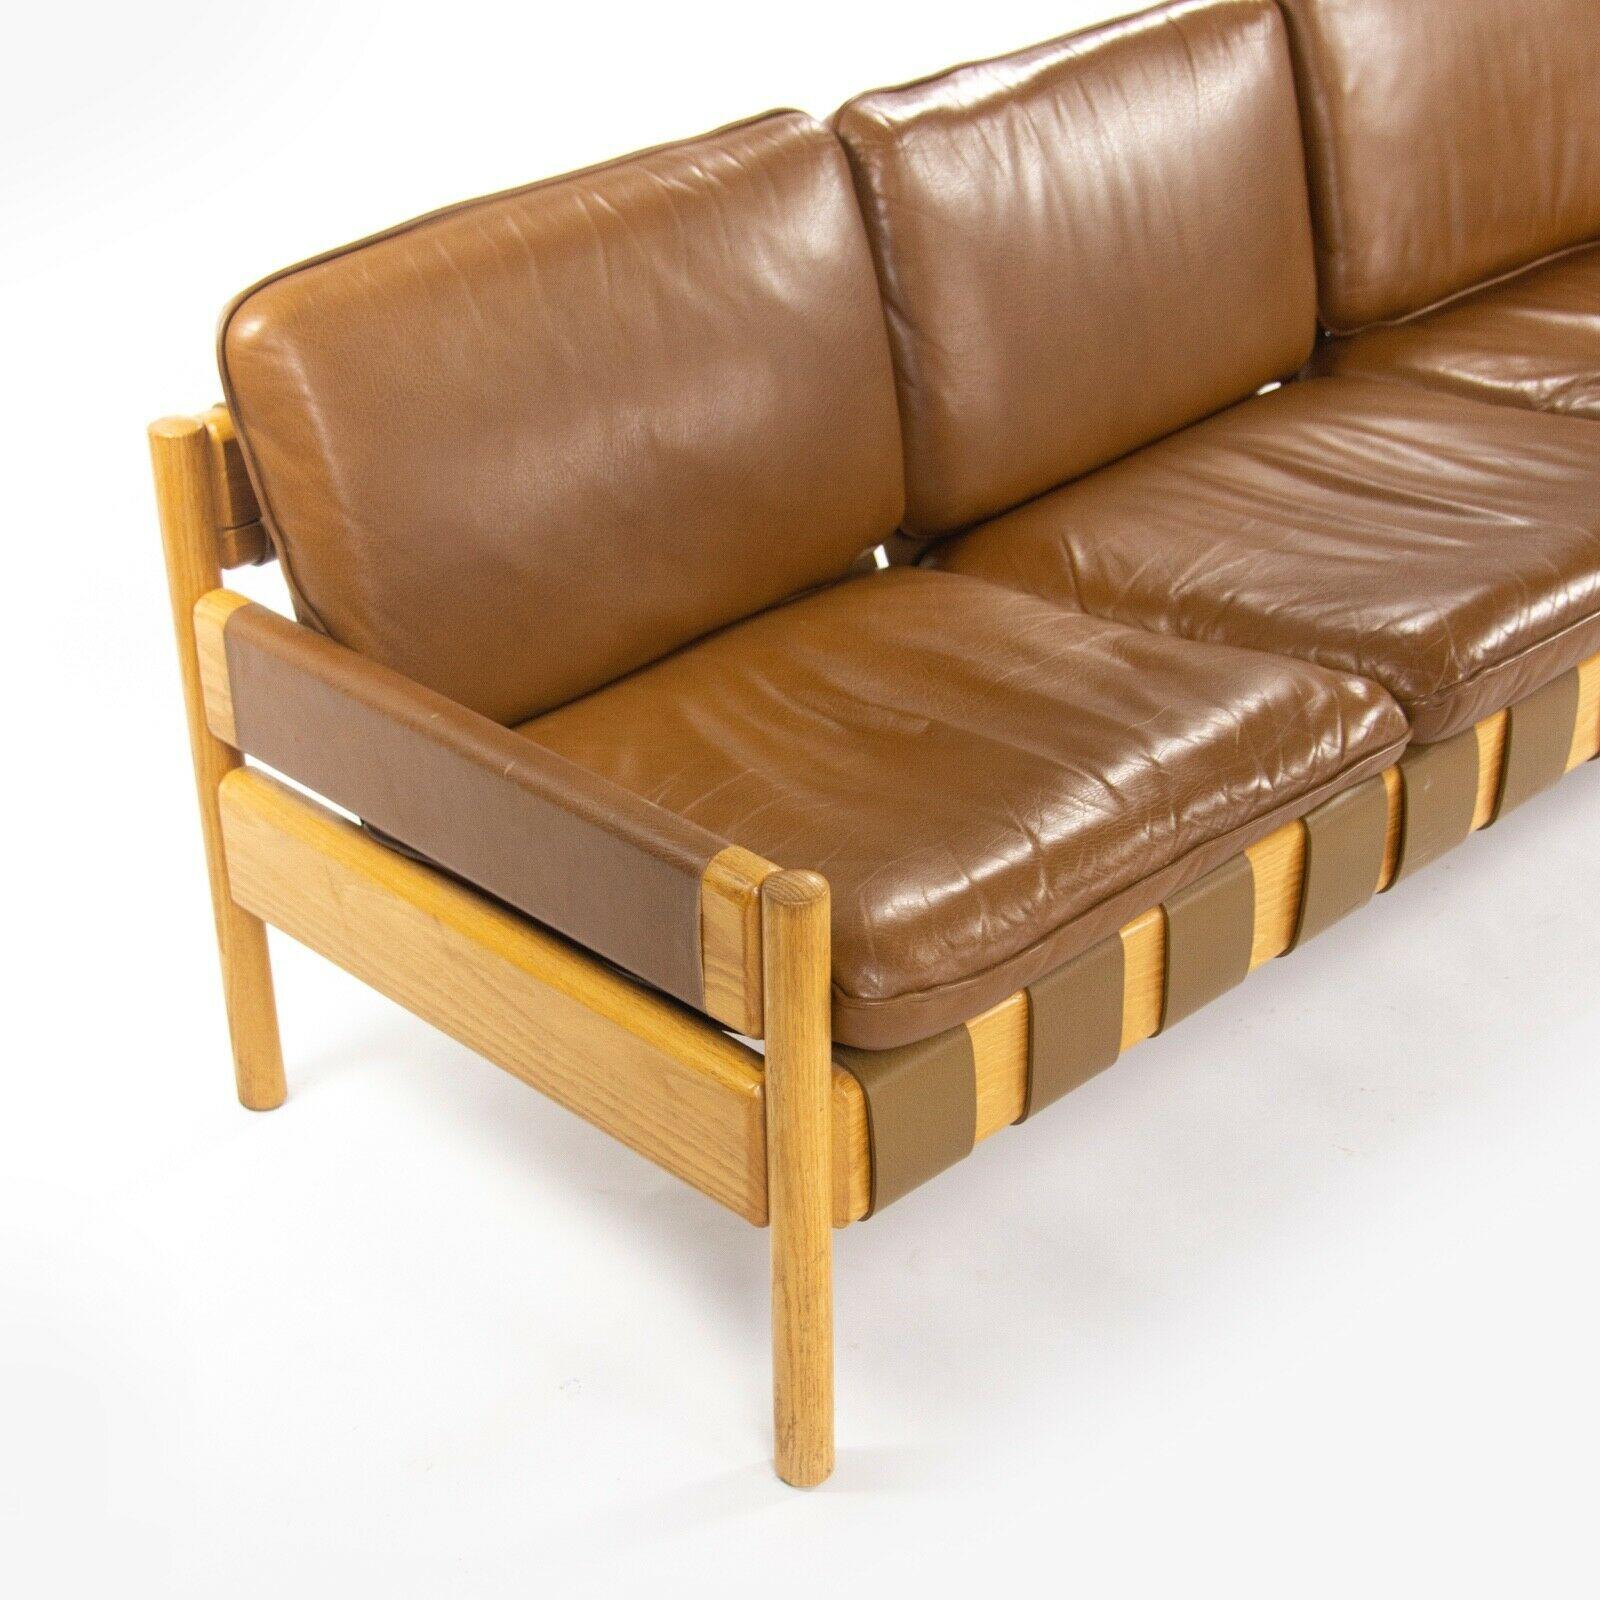 1976 Nicos Zographos Saronis Leather & Oak Sofa from Hugh Stubbins Library In Good Condition For Sale In Philadelphia, PA